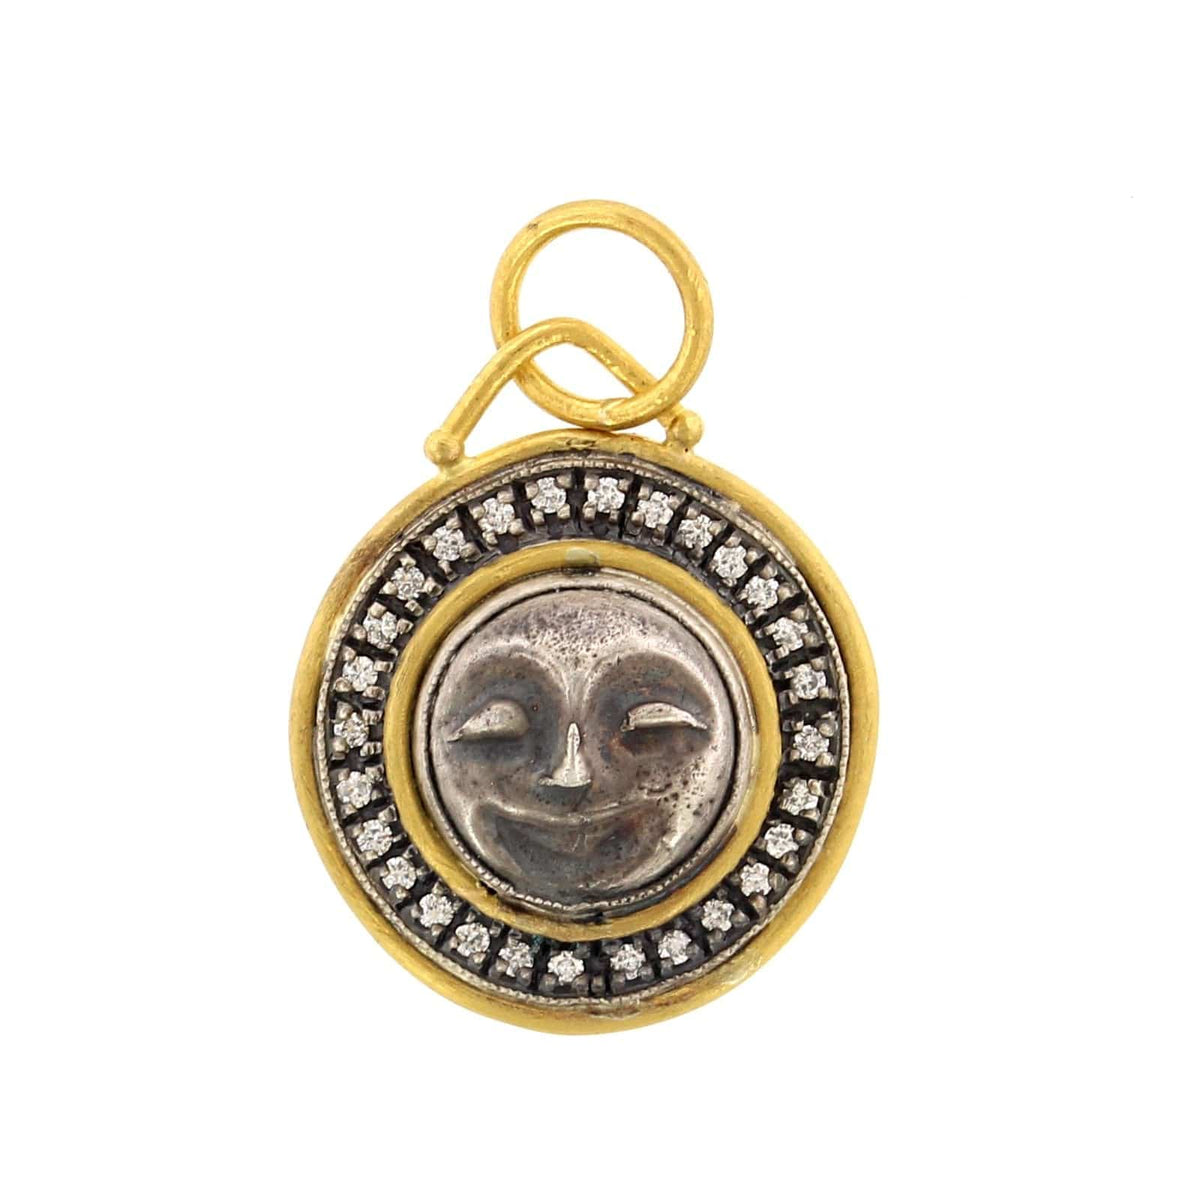 24K Yellow Gold and Sterling Silver Splendor Charm